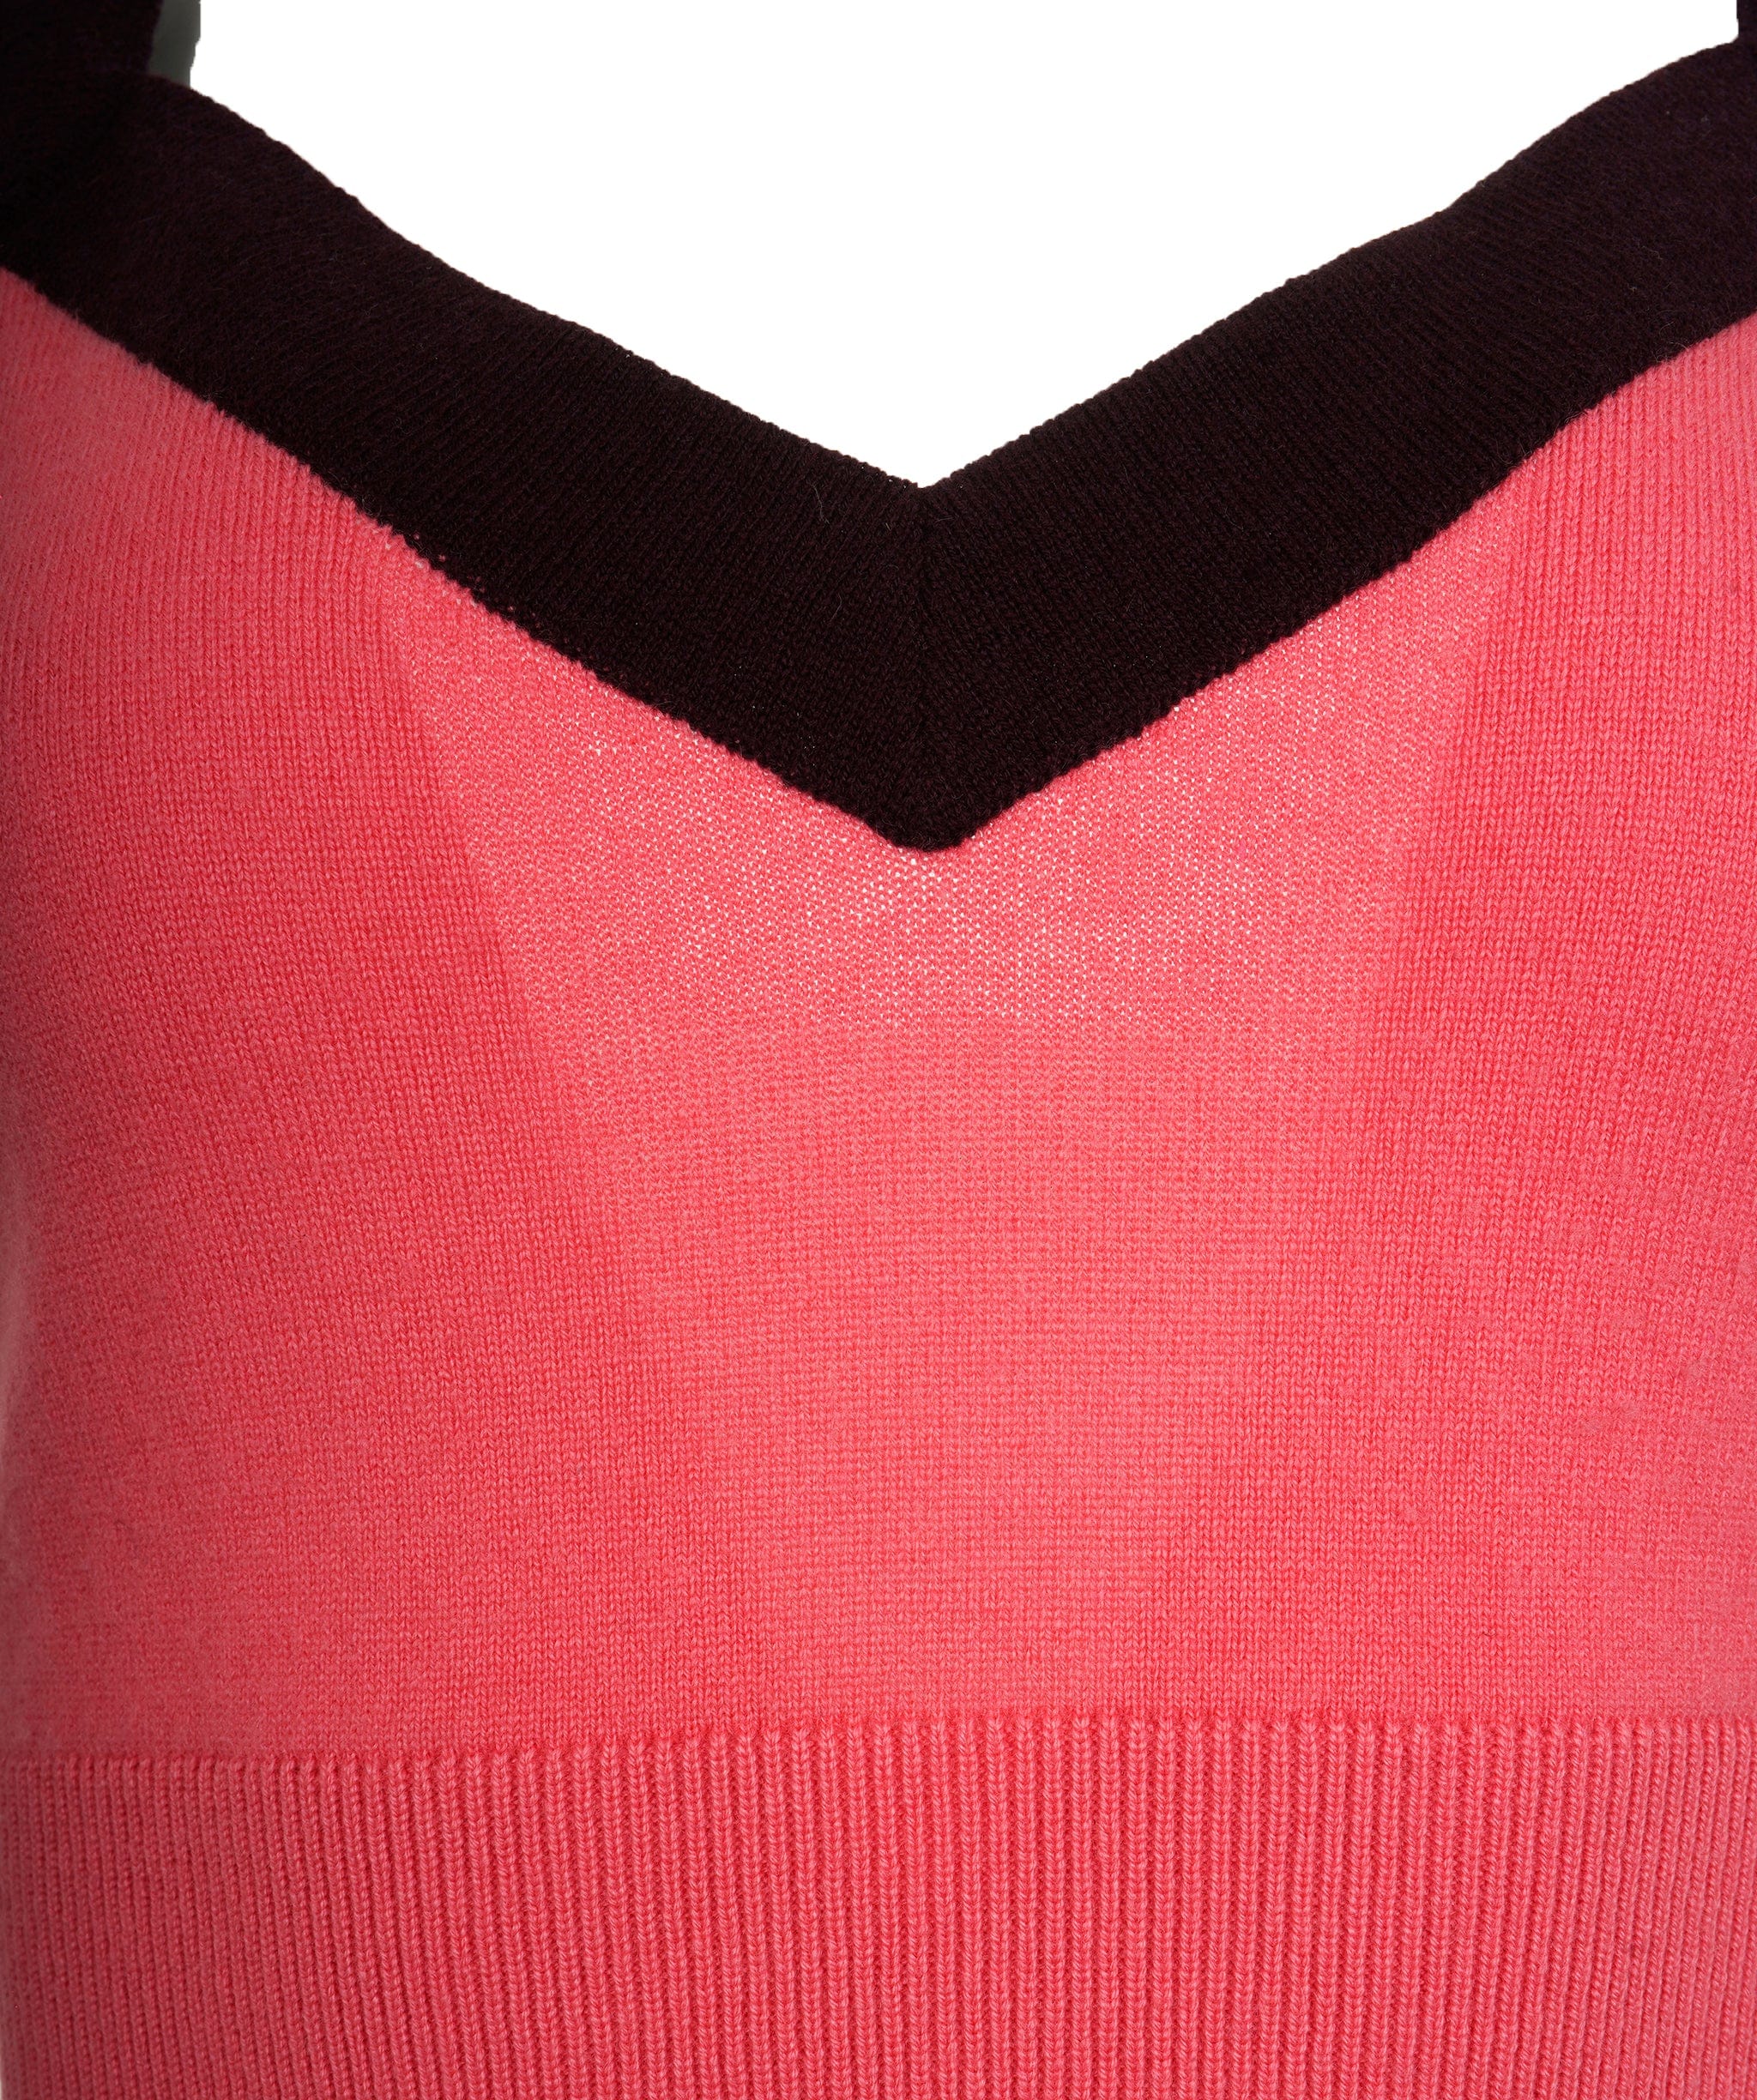 Chanel Chanel Top knit pink and black Métier d'Art 2020 FR38 P64643K60662 AVC1855